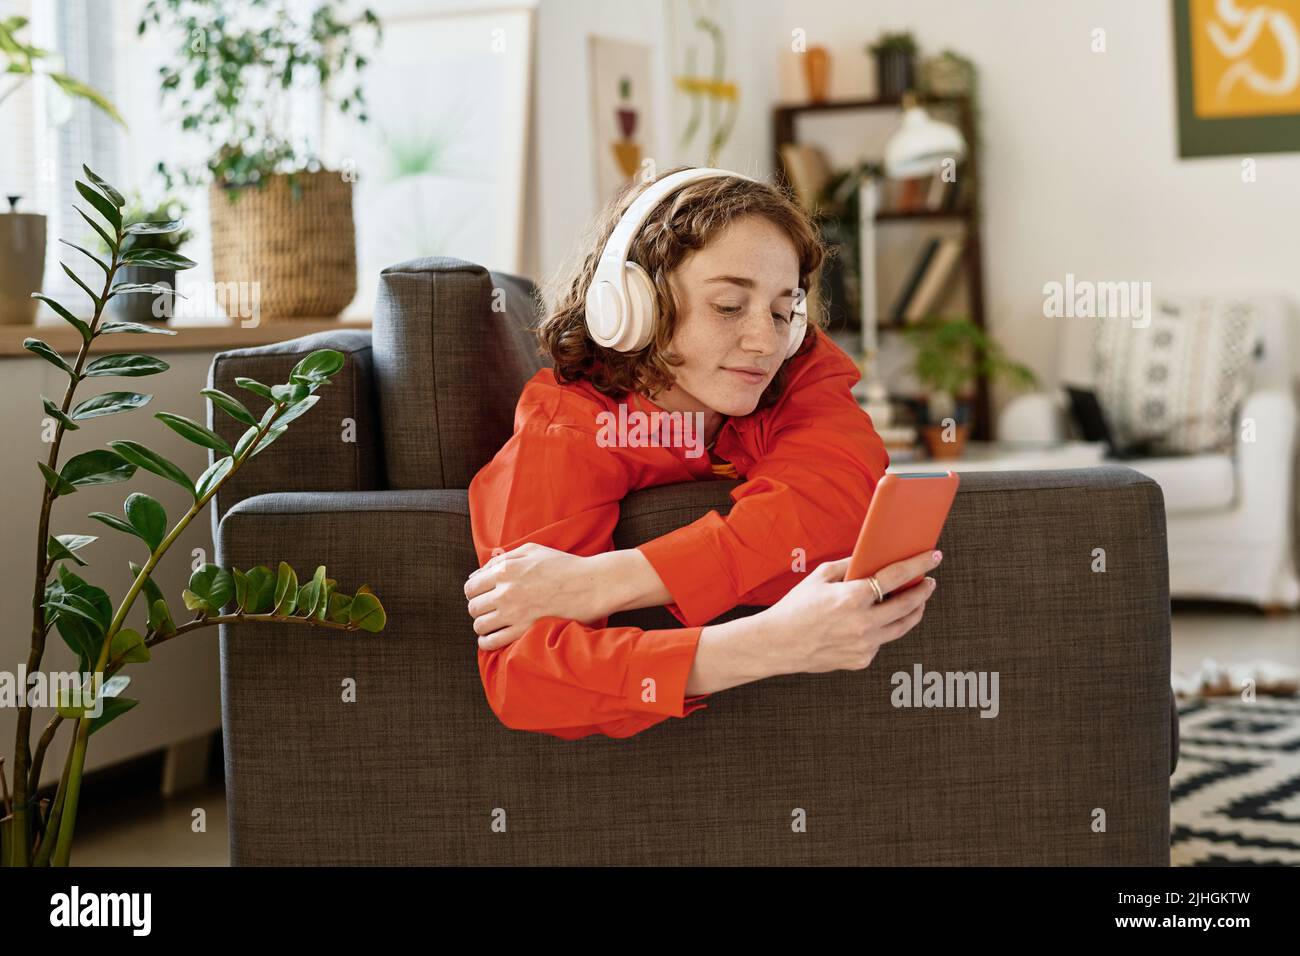 Cute adolescent girl in red shirt and white headphones looking at smartphone acreen while communicating in video chat Stock Photo